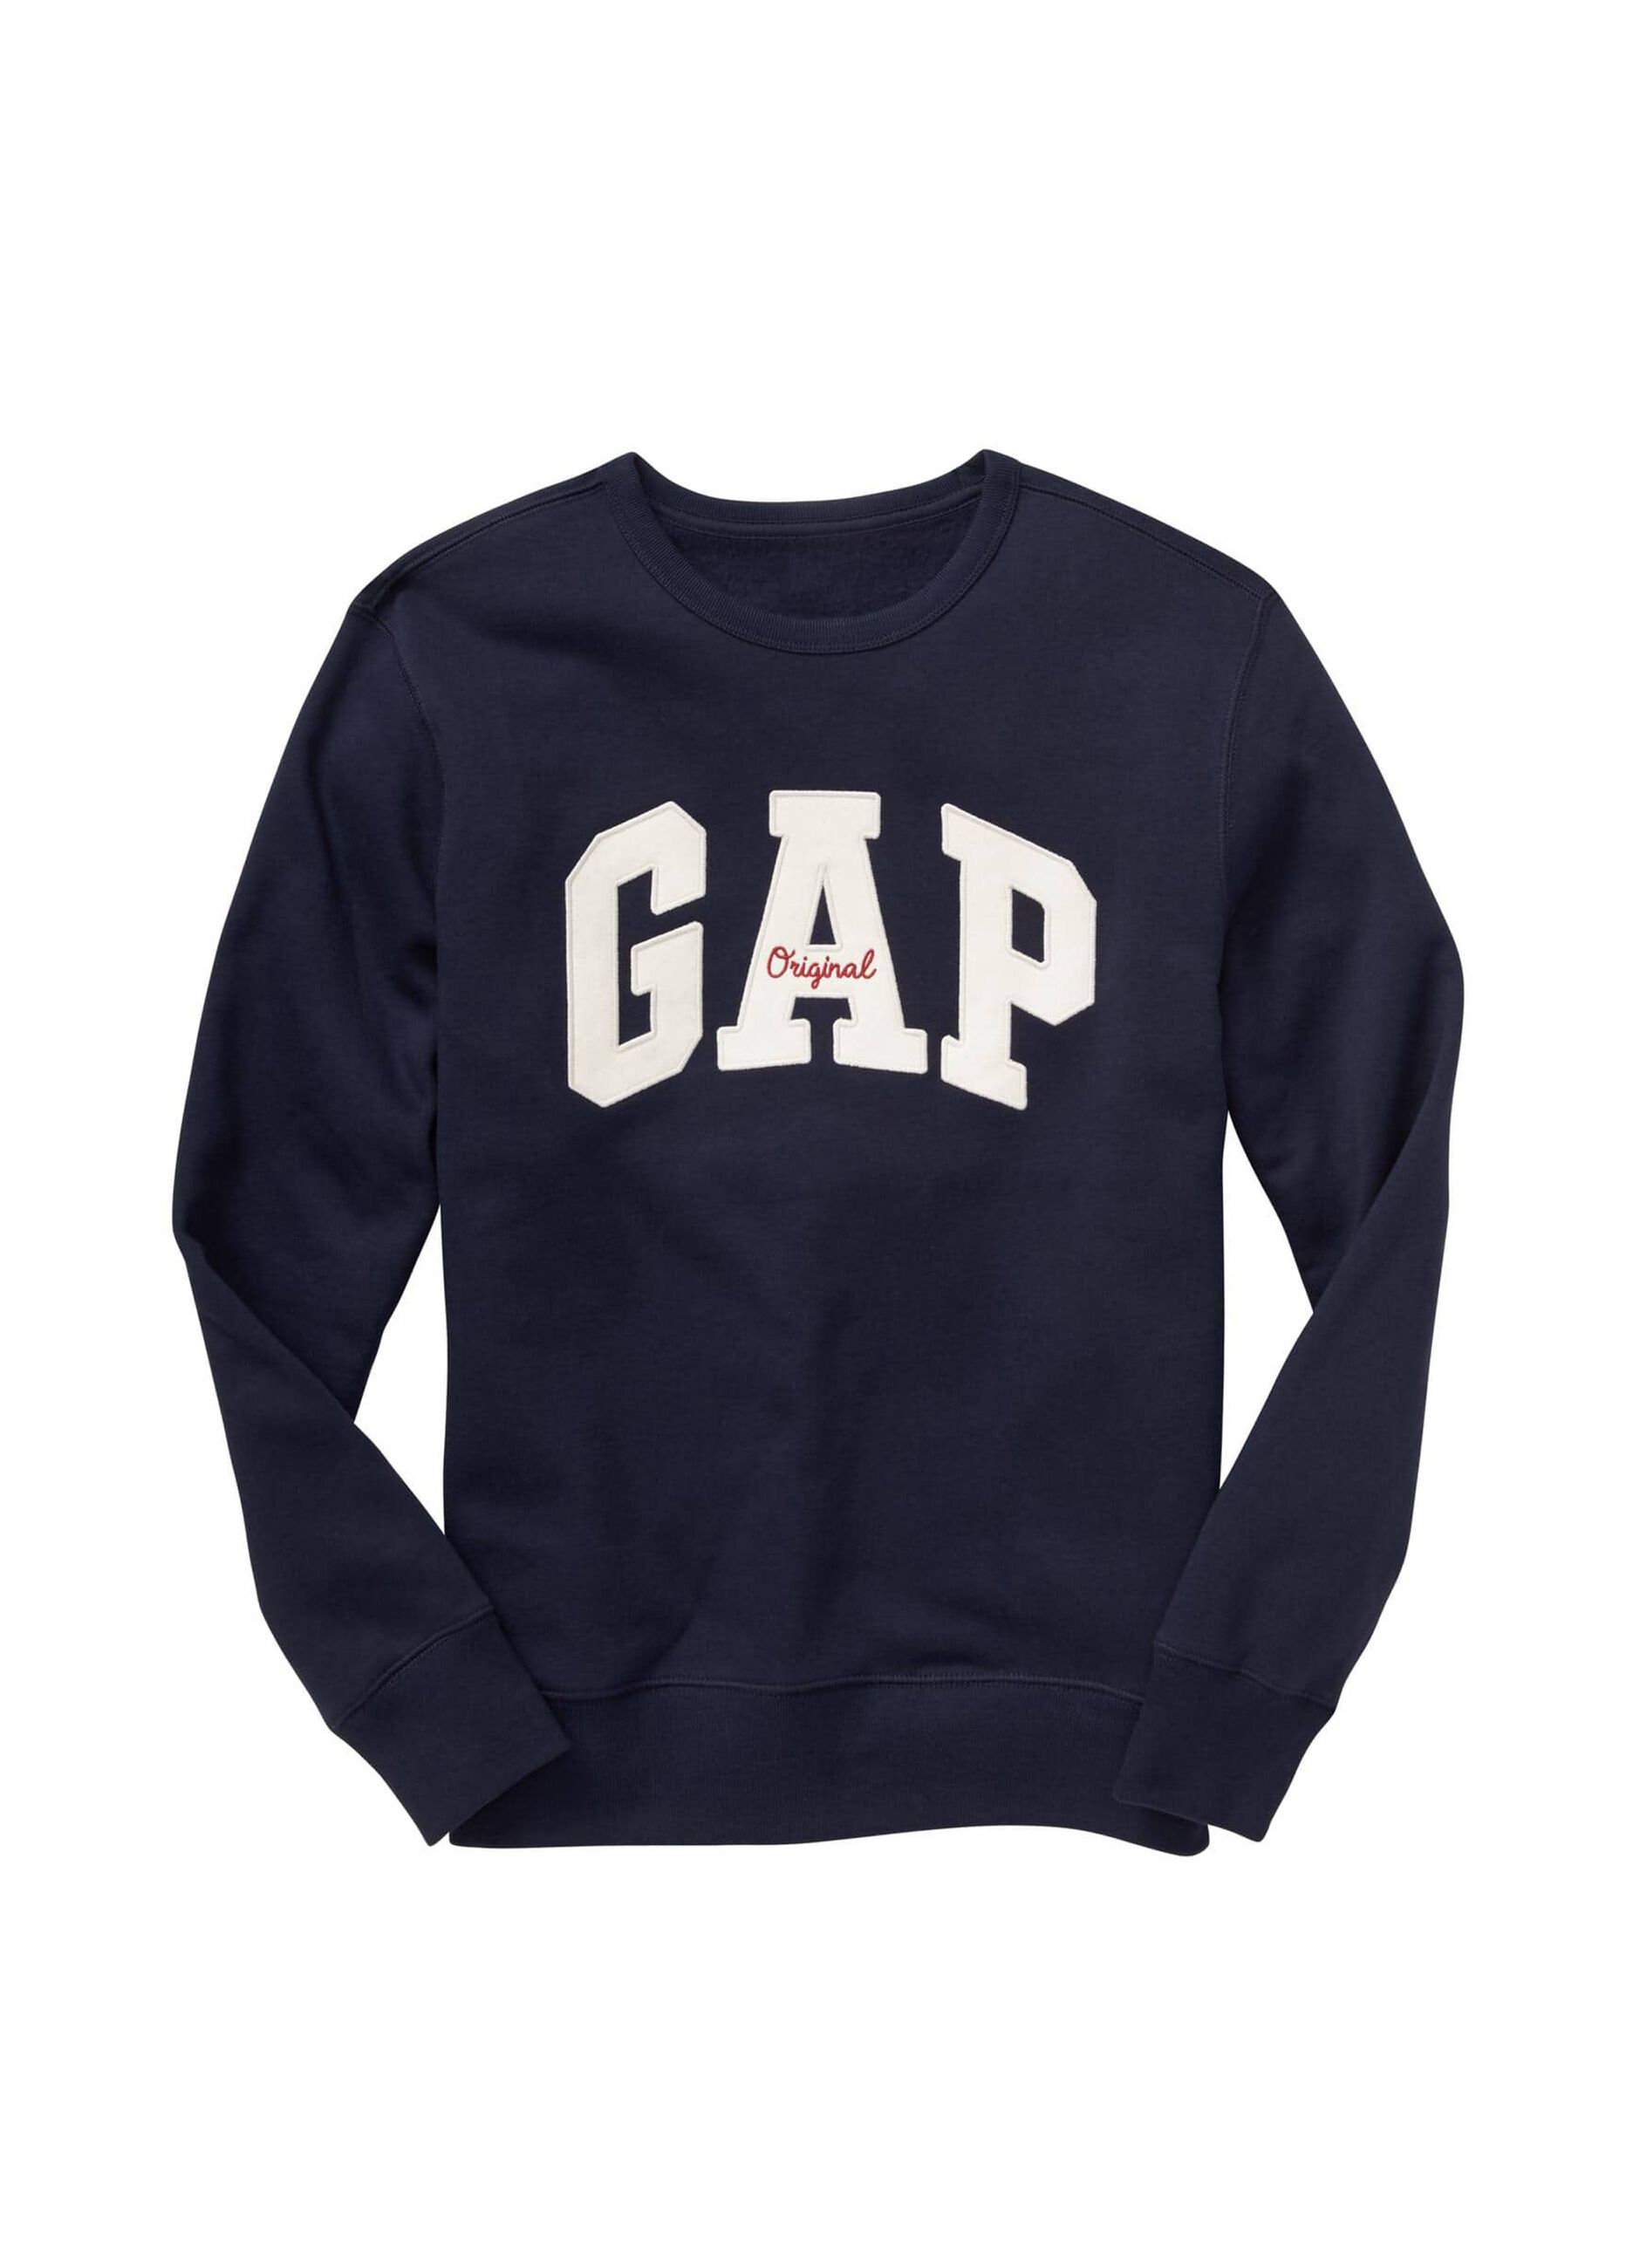 Round-neck sweatshirt with logo patch and embroidery